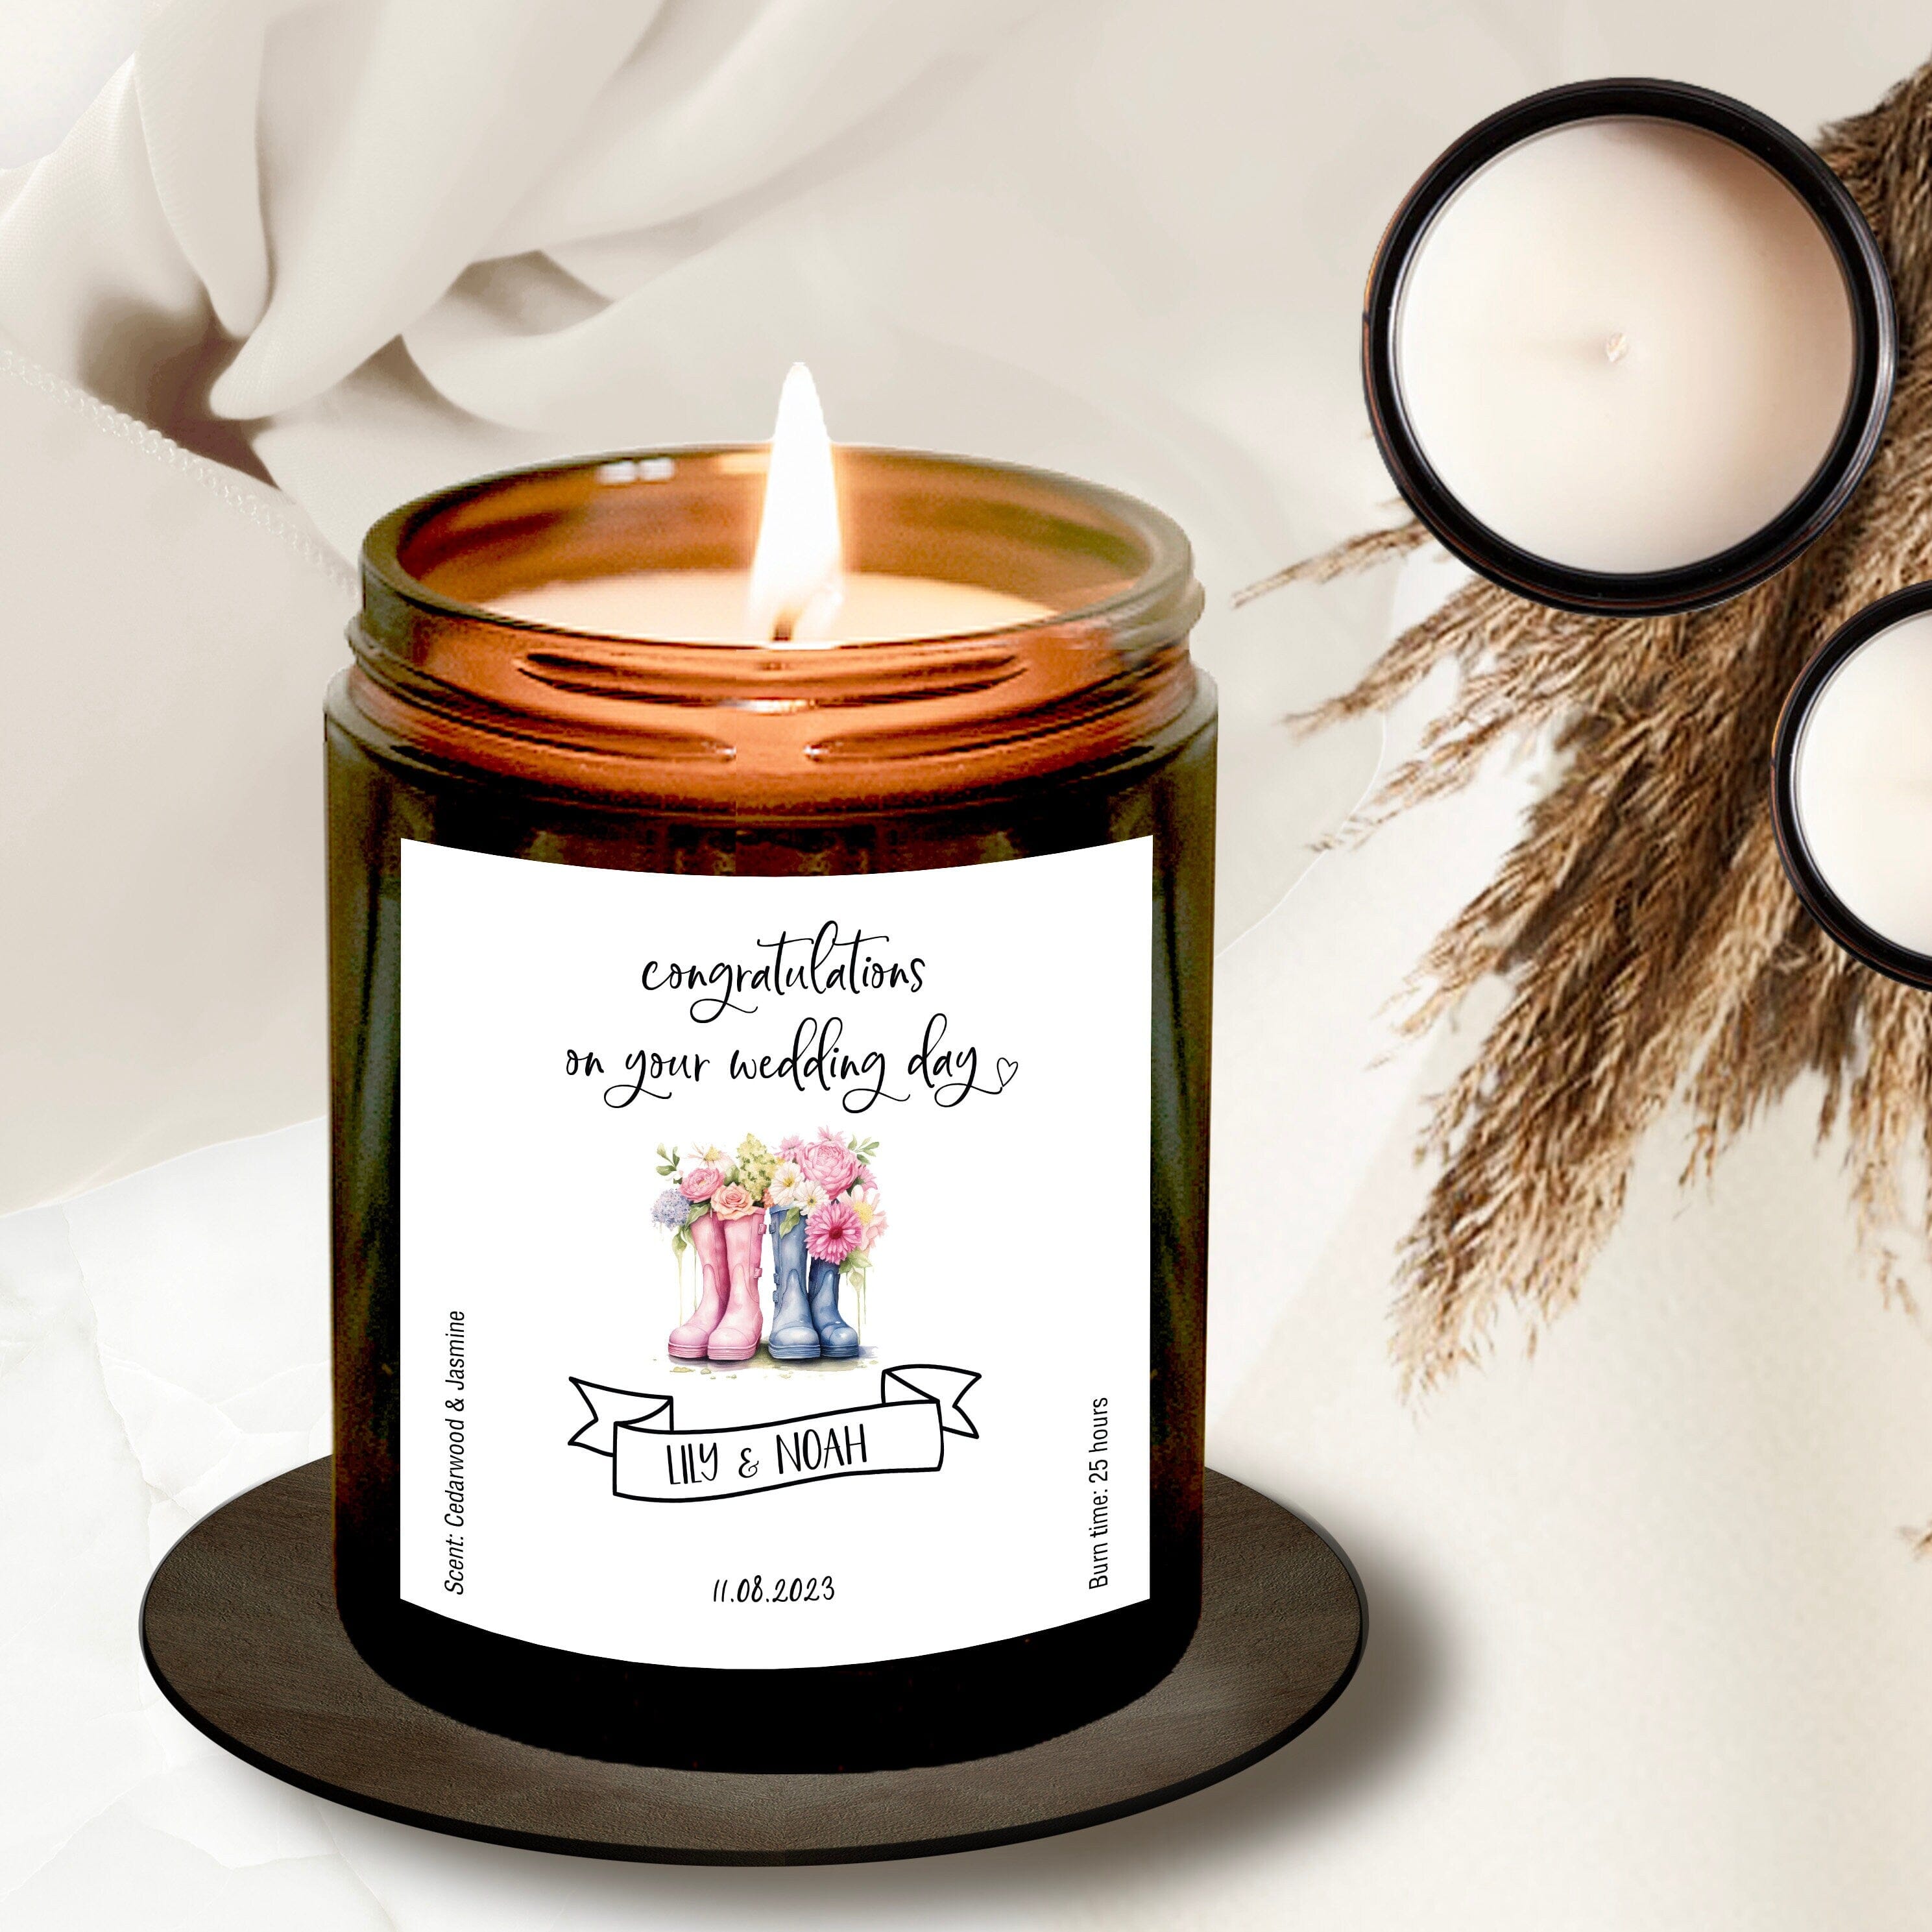 Personalised Wedding Gift Soy Wax Scented Candle, Welly Boots Design, With date and couple's names